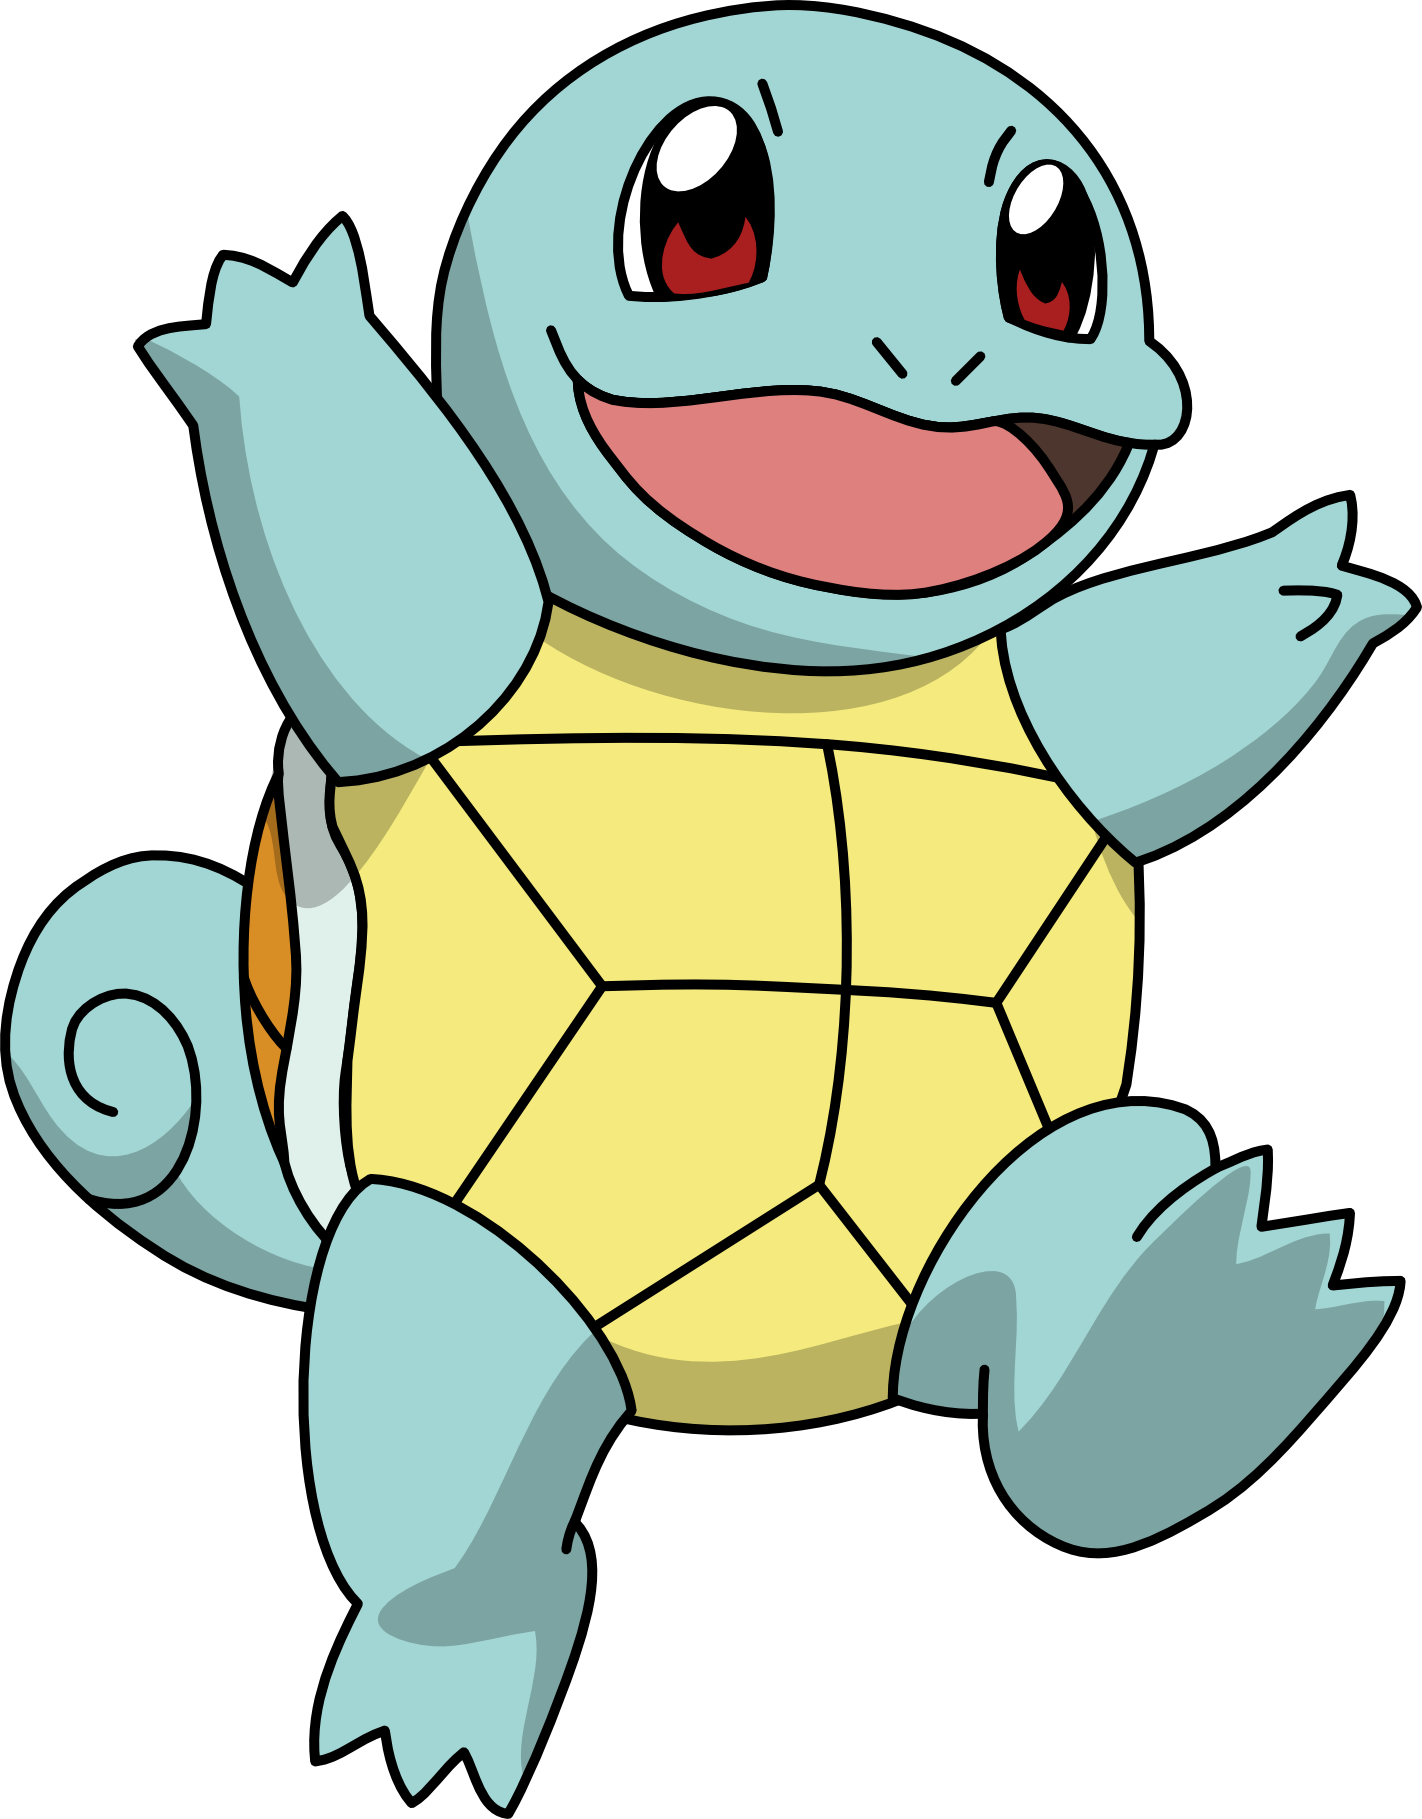 squirtle_by_mighty355-d7dwh31